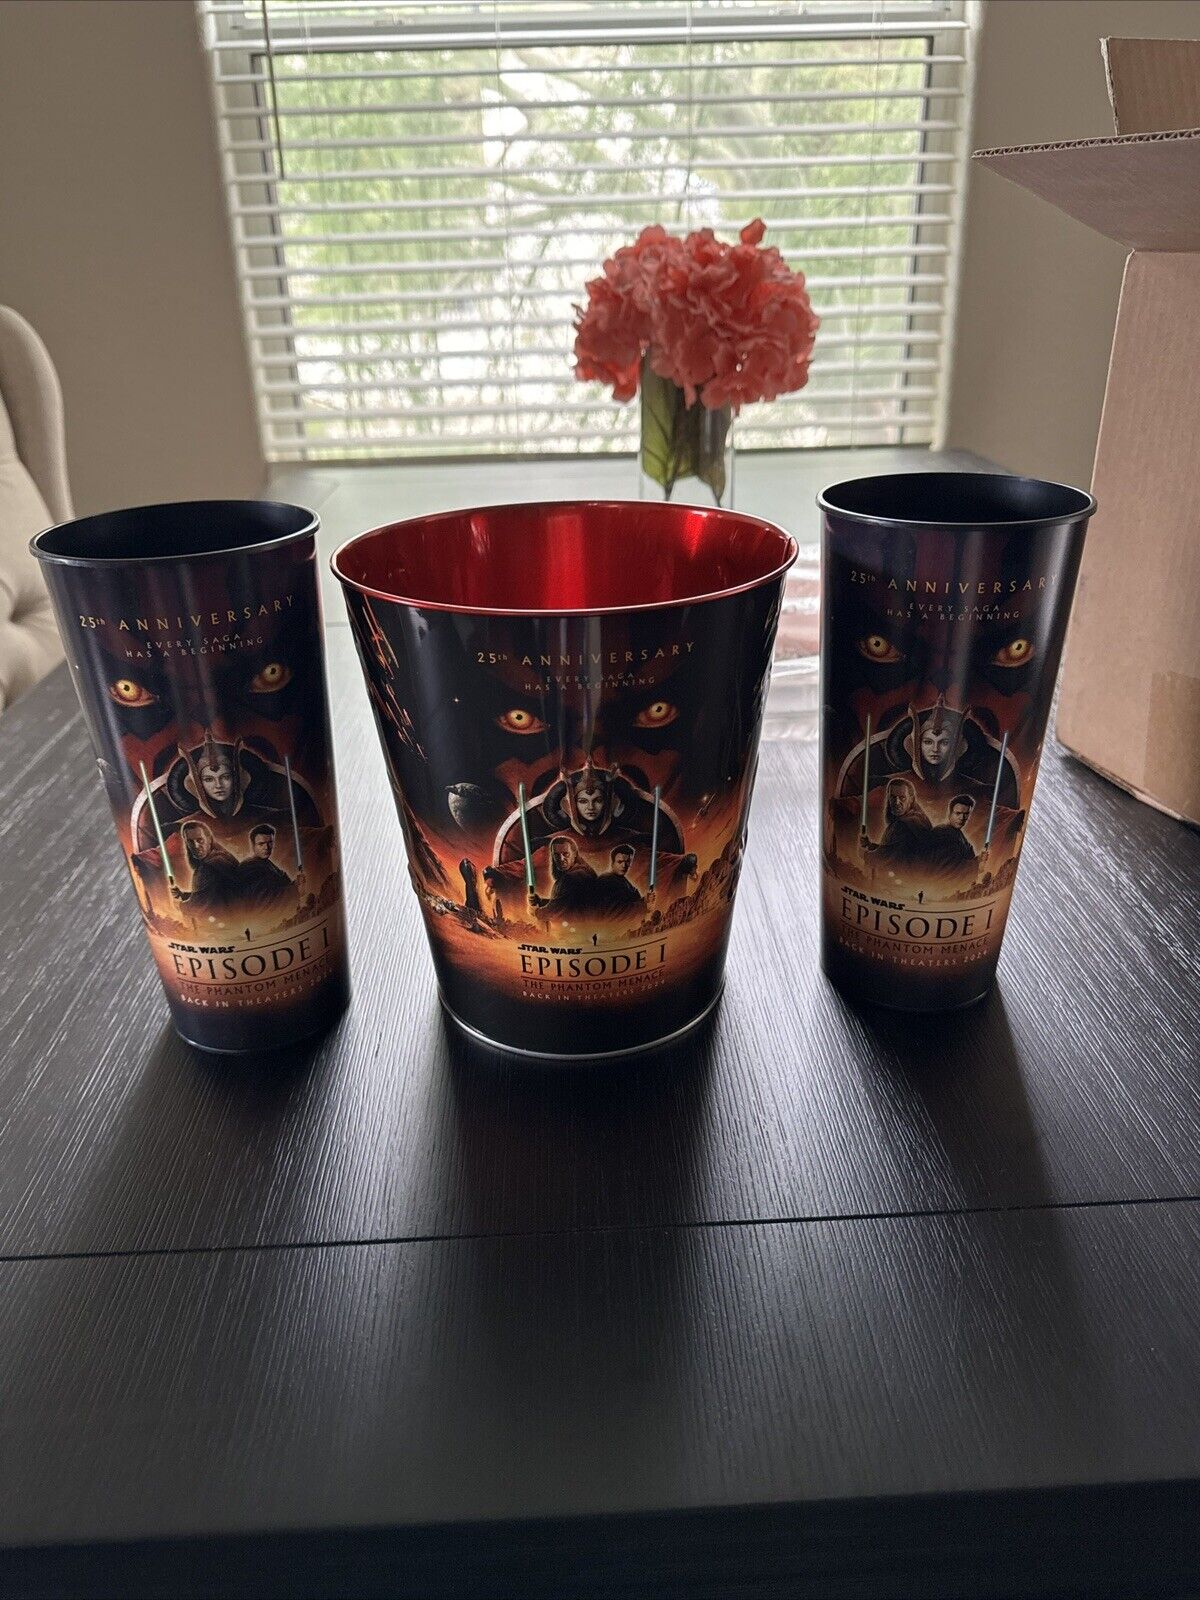 Cinemark Star Wars Episode 1 One 25th Anniversary Popcorn Tin And Cup Set